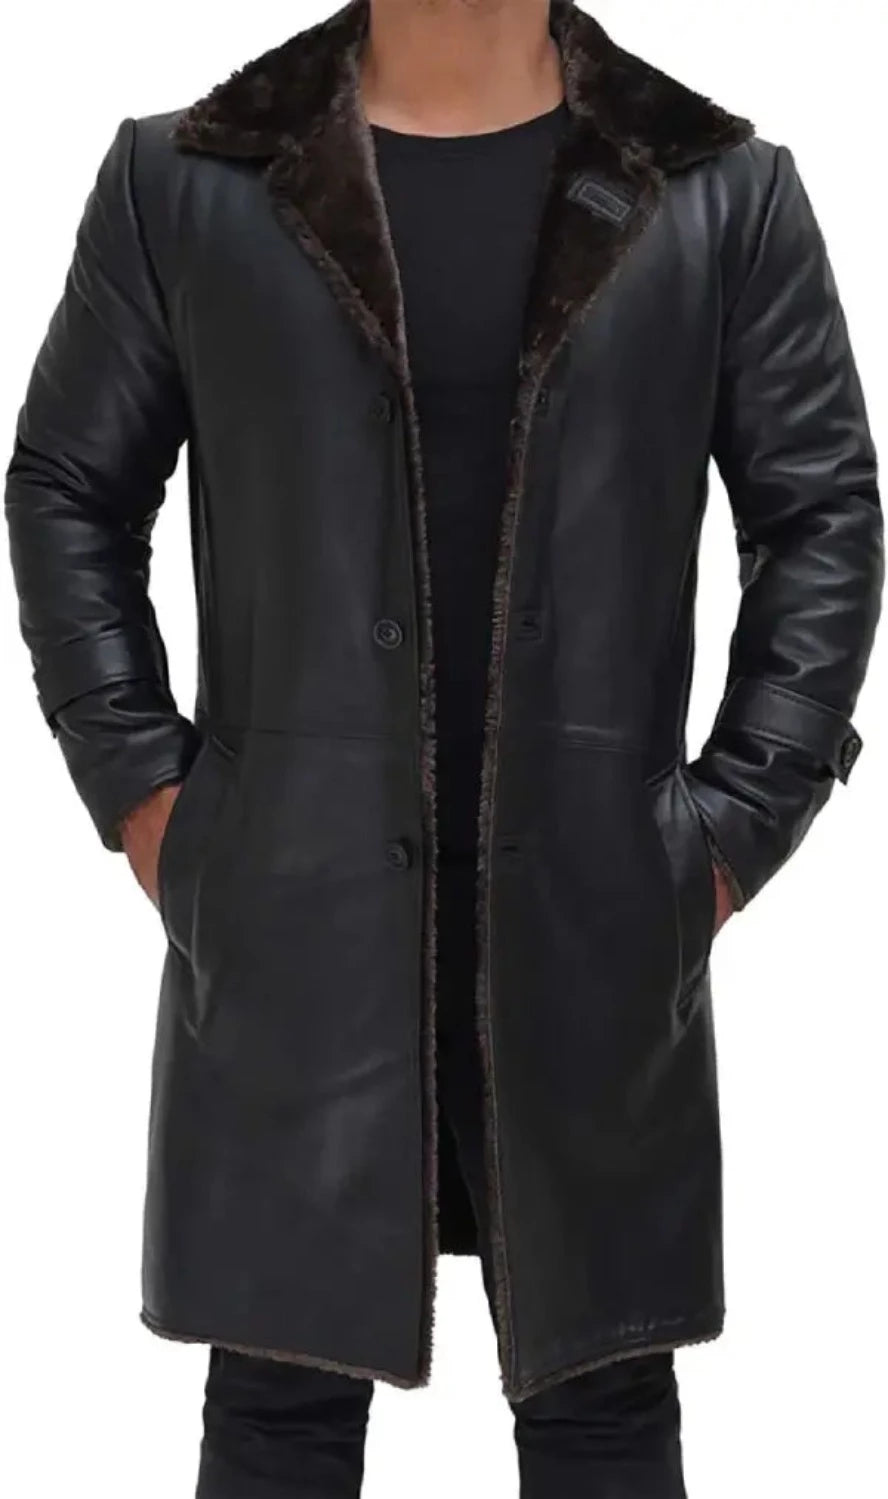 Picture of a model wearing our Mens Leather Shearling Trench Coat, front view , not buttoned showing shearling lining.